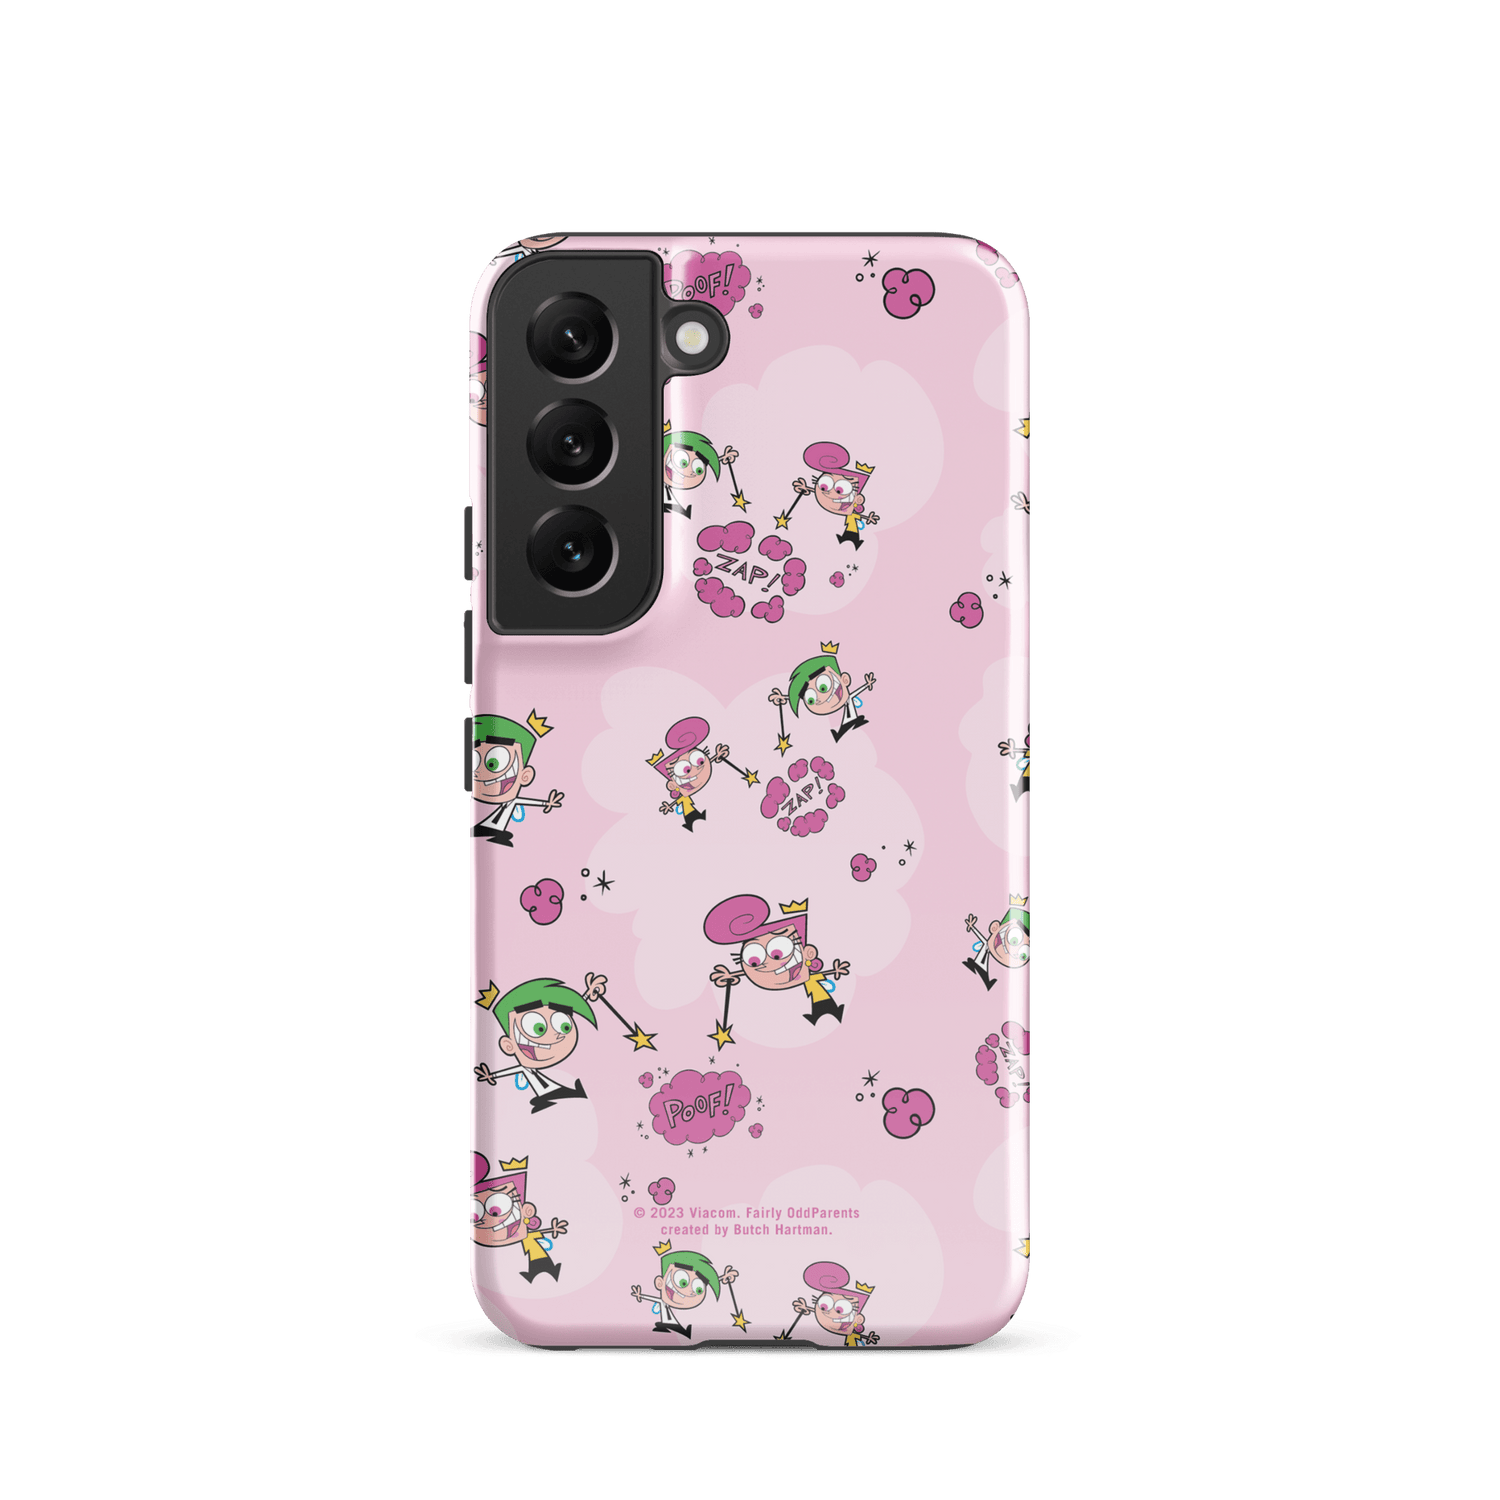 The Fairly OddParents Zap! Pattern Tough Phone Case - Samsung - Paramount Shop